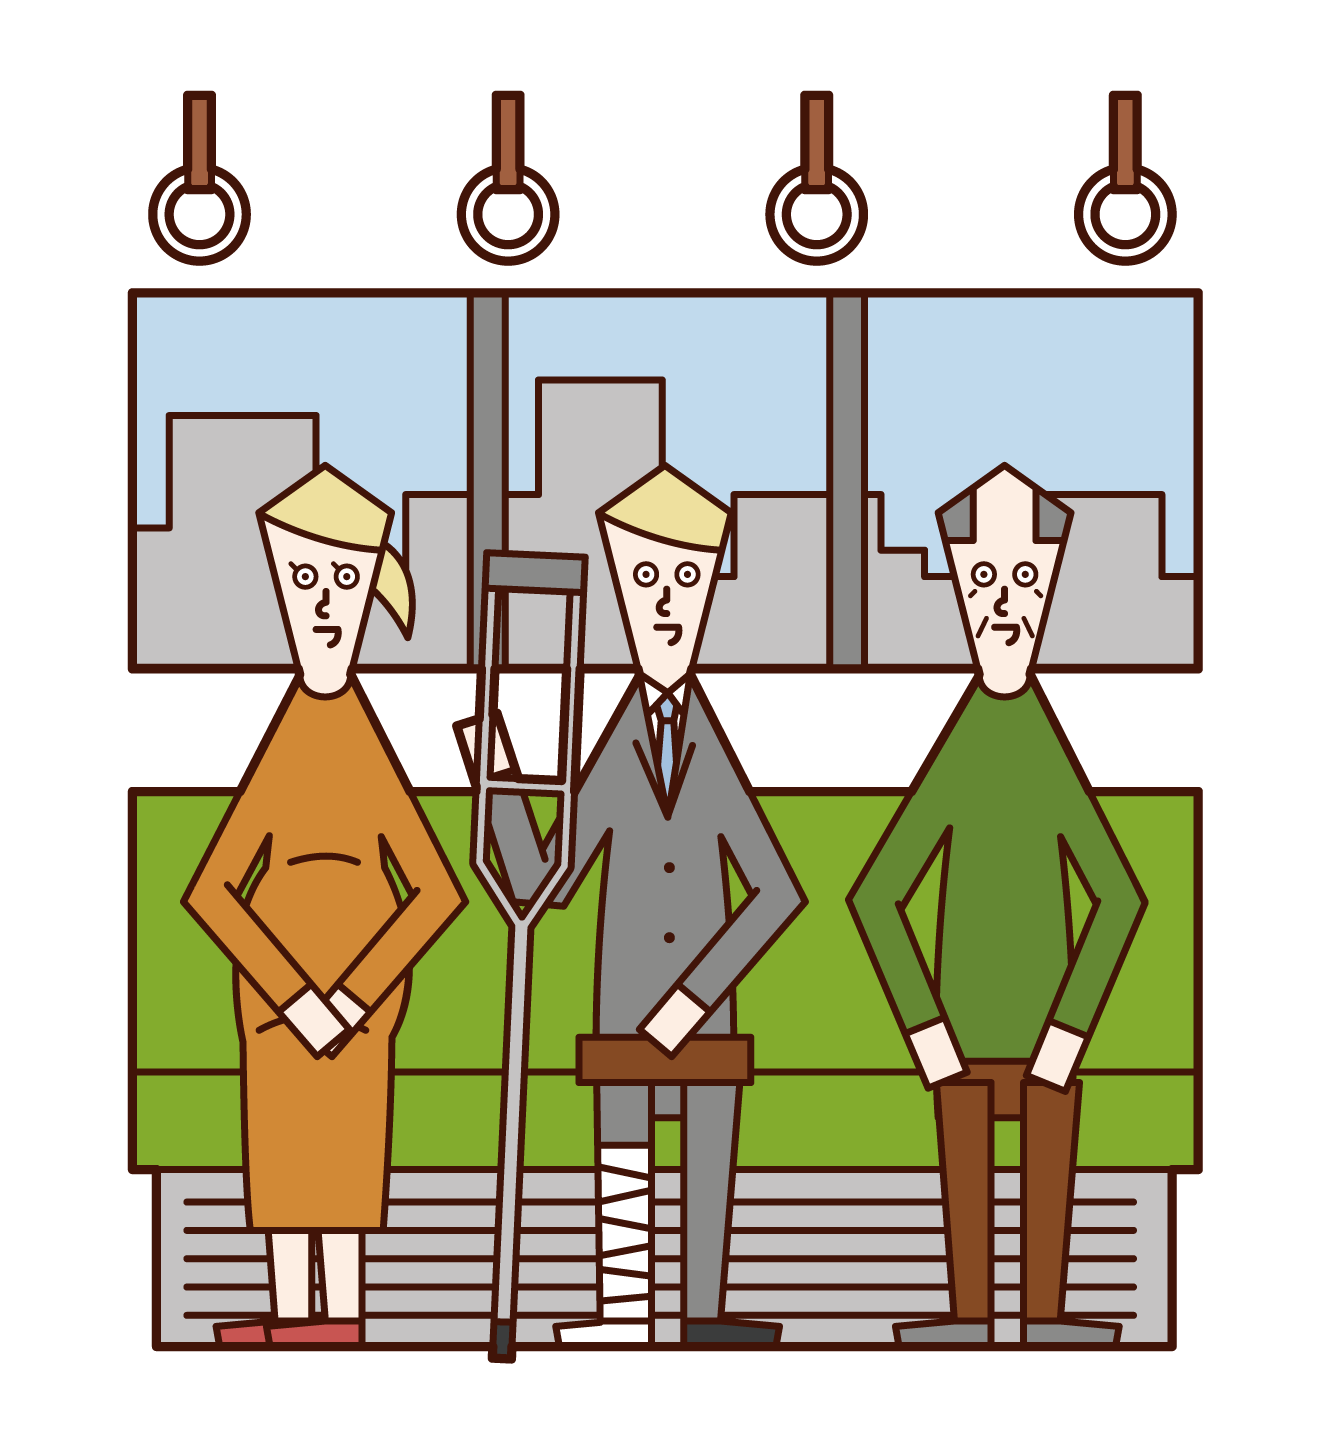 Illustration of people sitting in priority seats